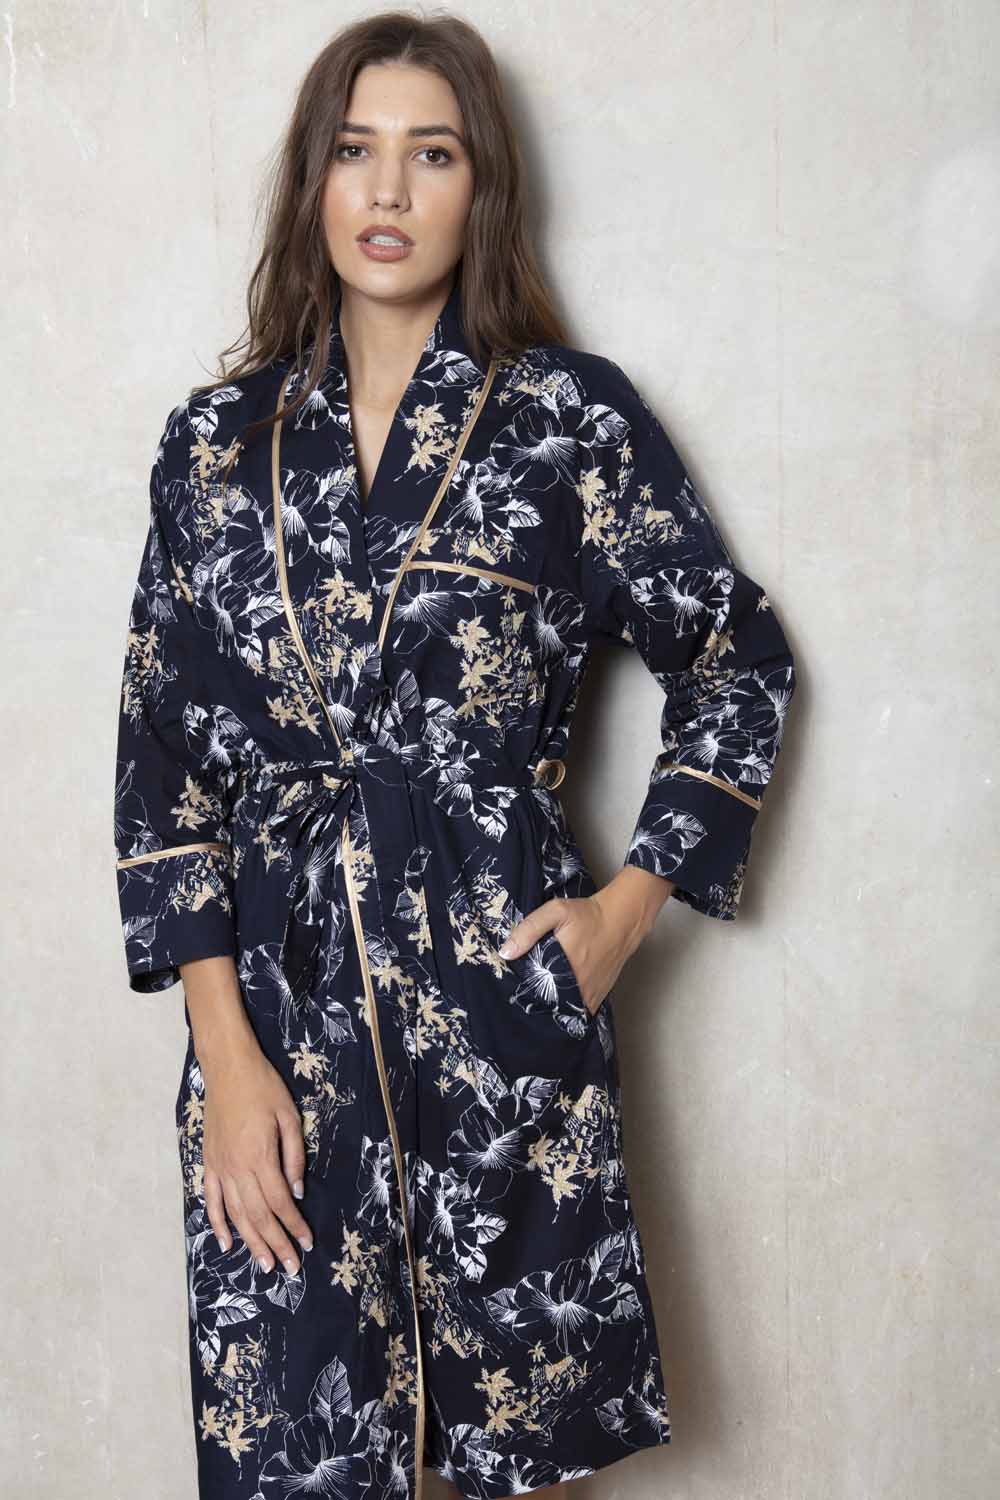 Cottonreal 'Wild Hibiscus' Navy & Gold Floral Robe